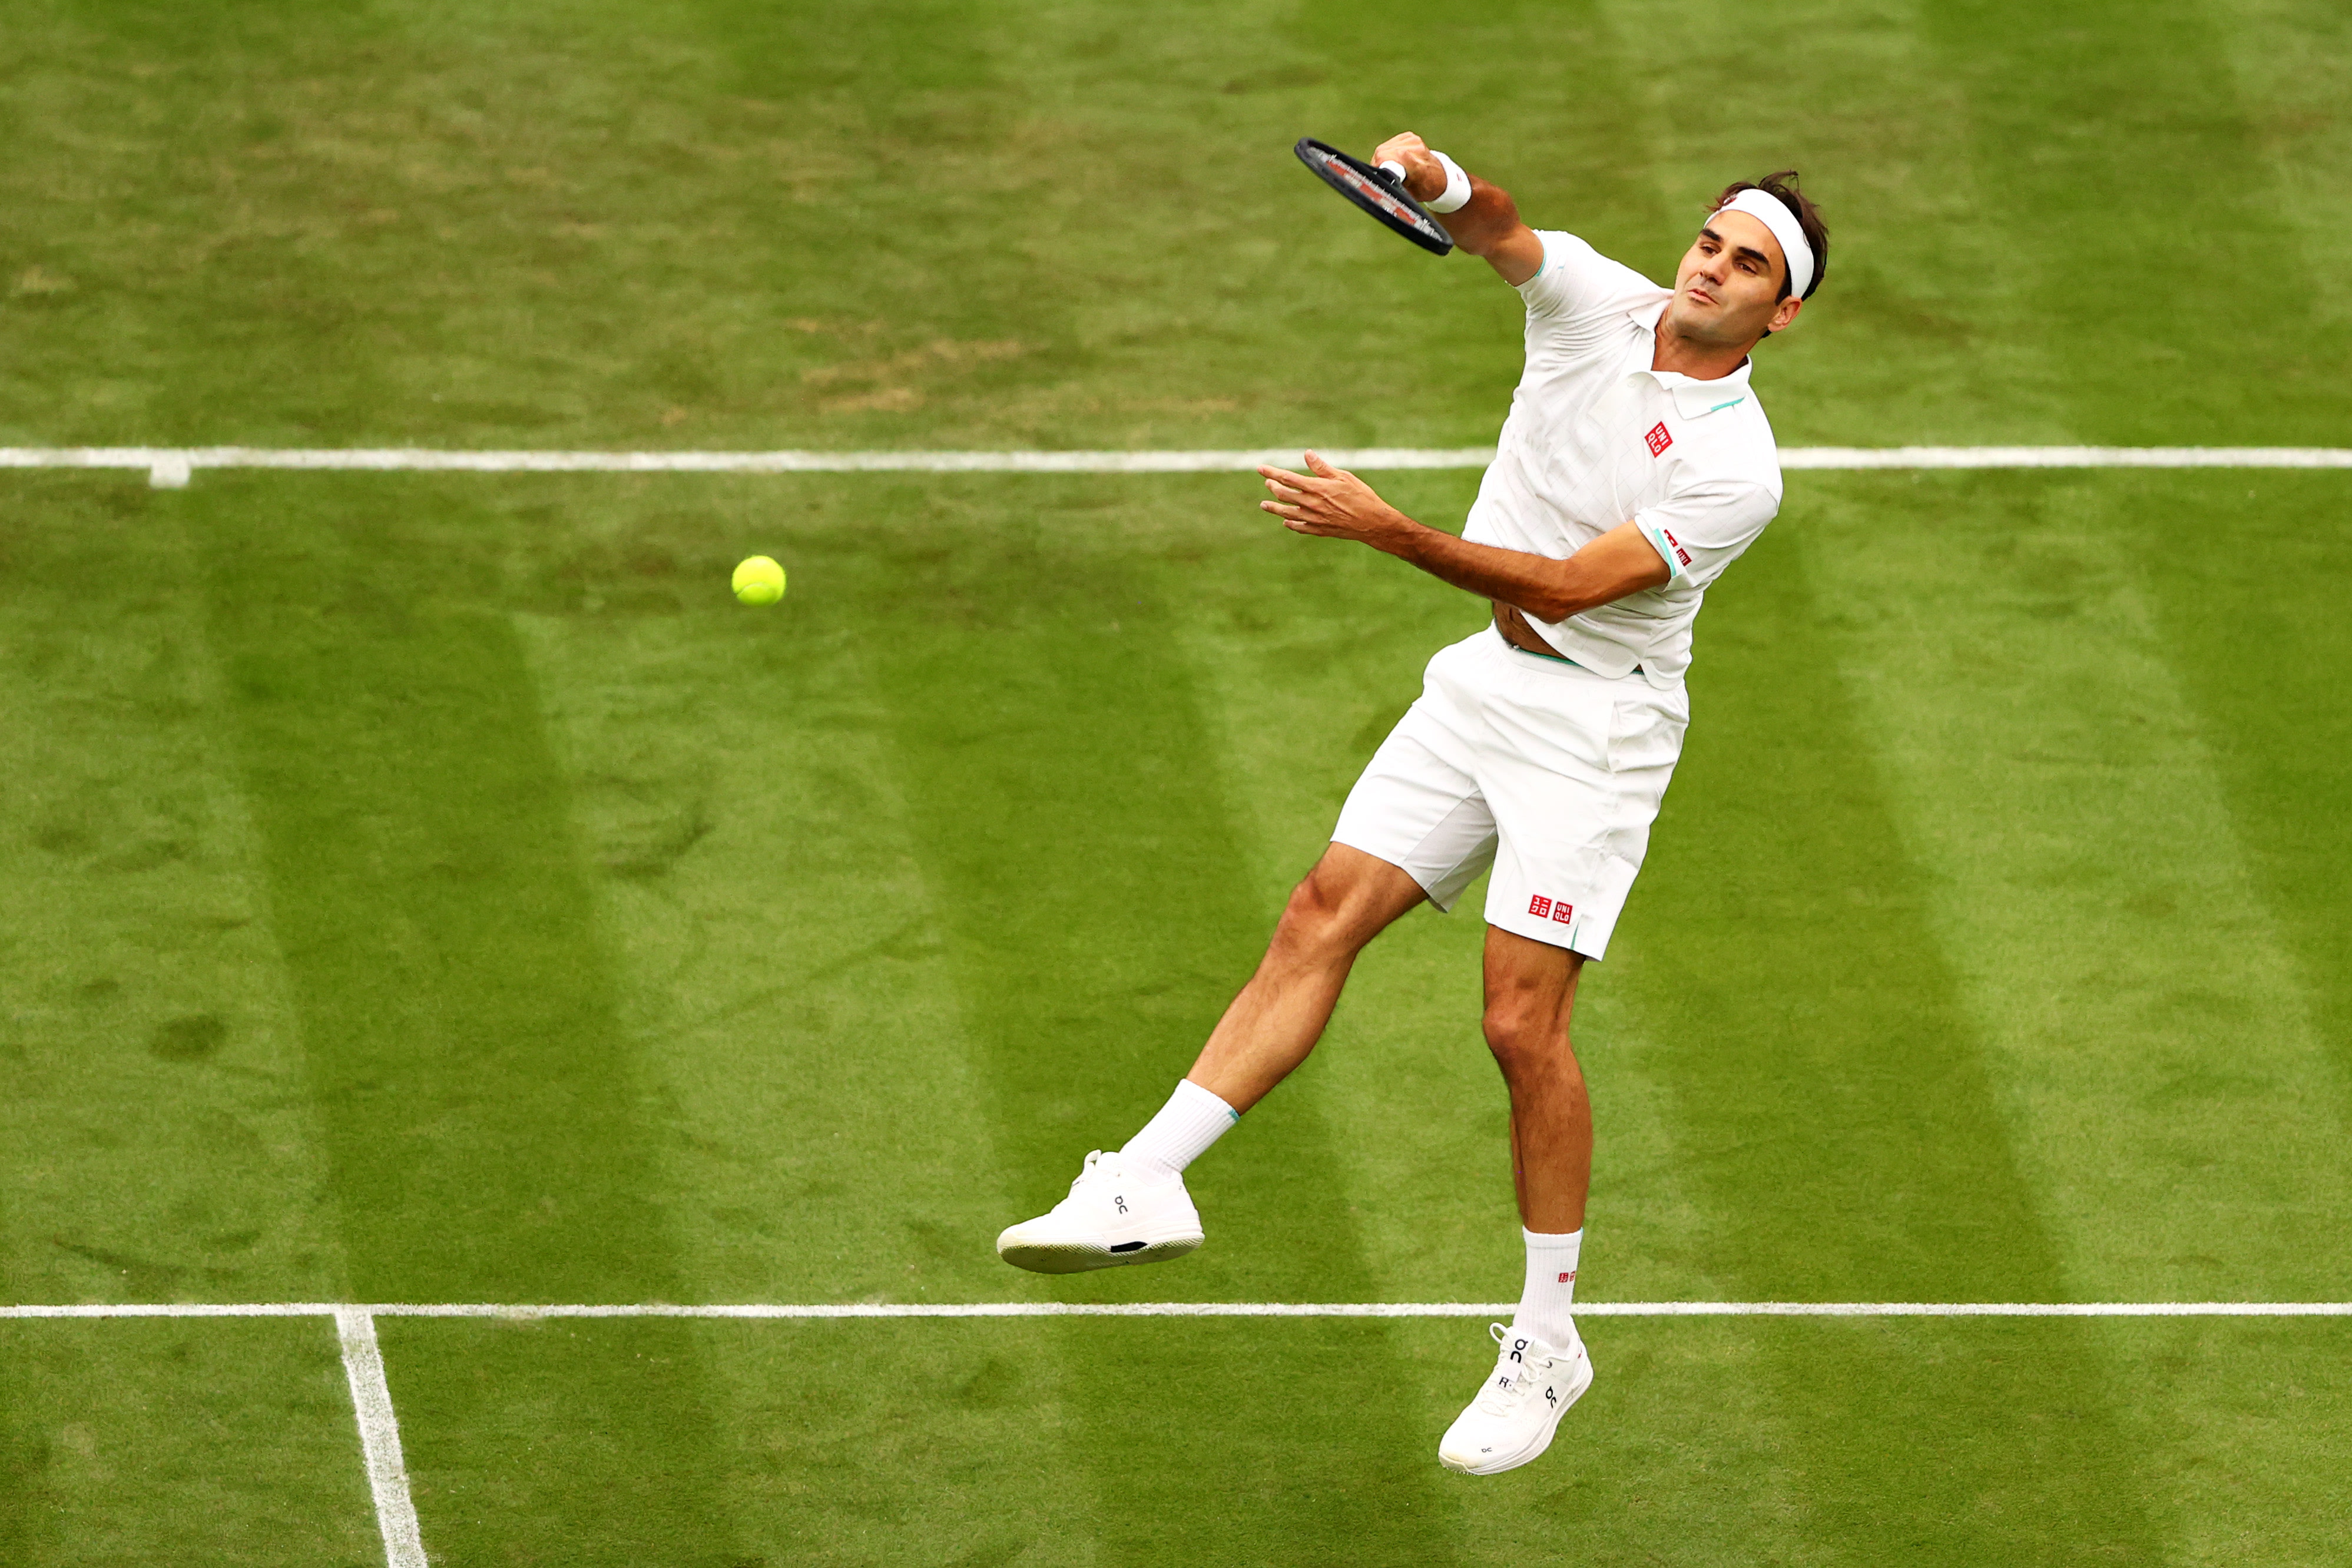 Roger Federer splits four sets with Adrian Mannarino, but escapes first round at Wimbledon after Frenchmans Centre Court fall